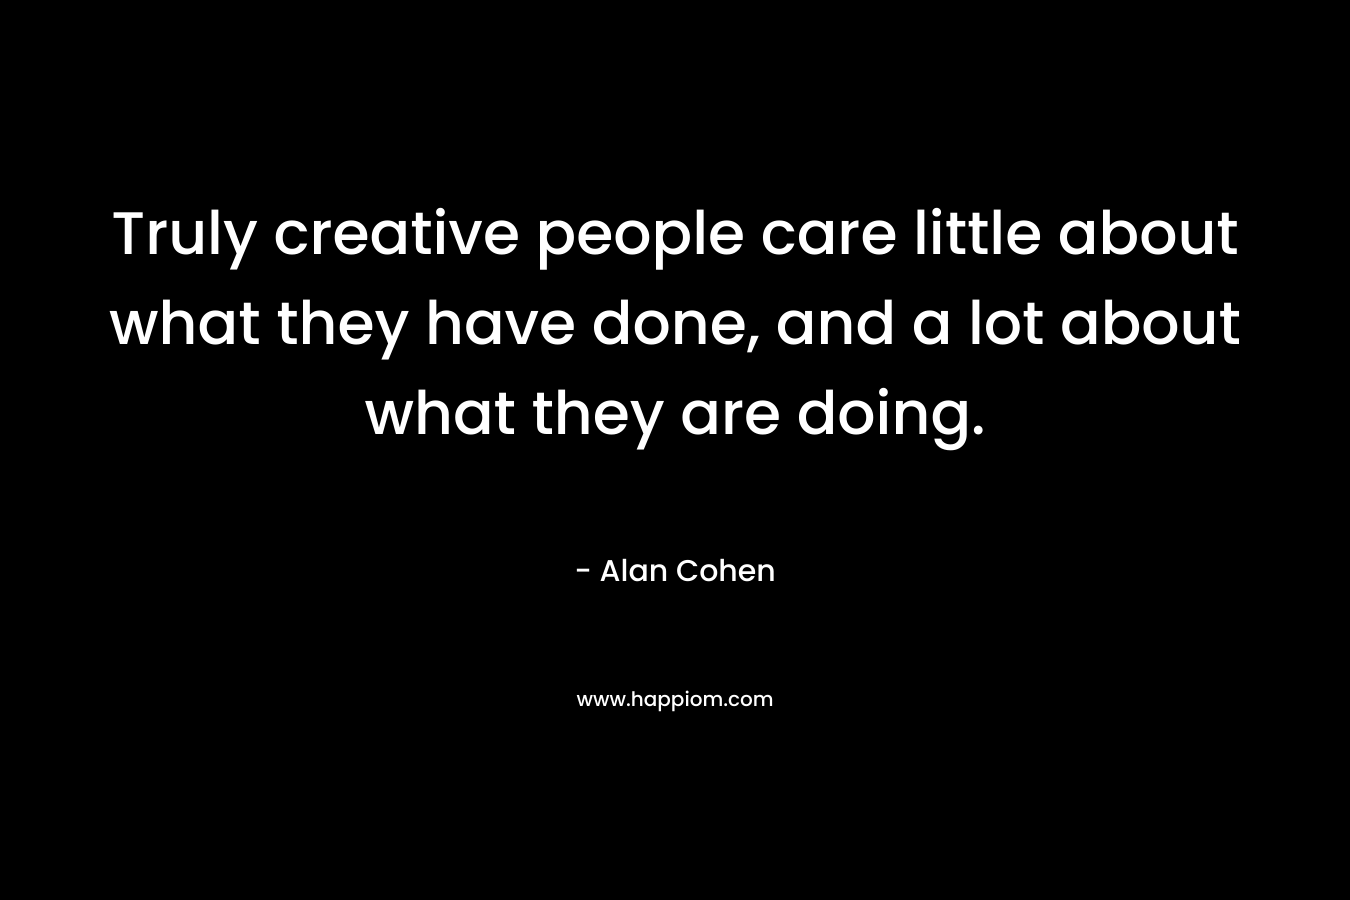 Truly creative people care little about what they have done, and a lot about what they are doing.